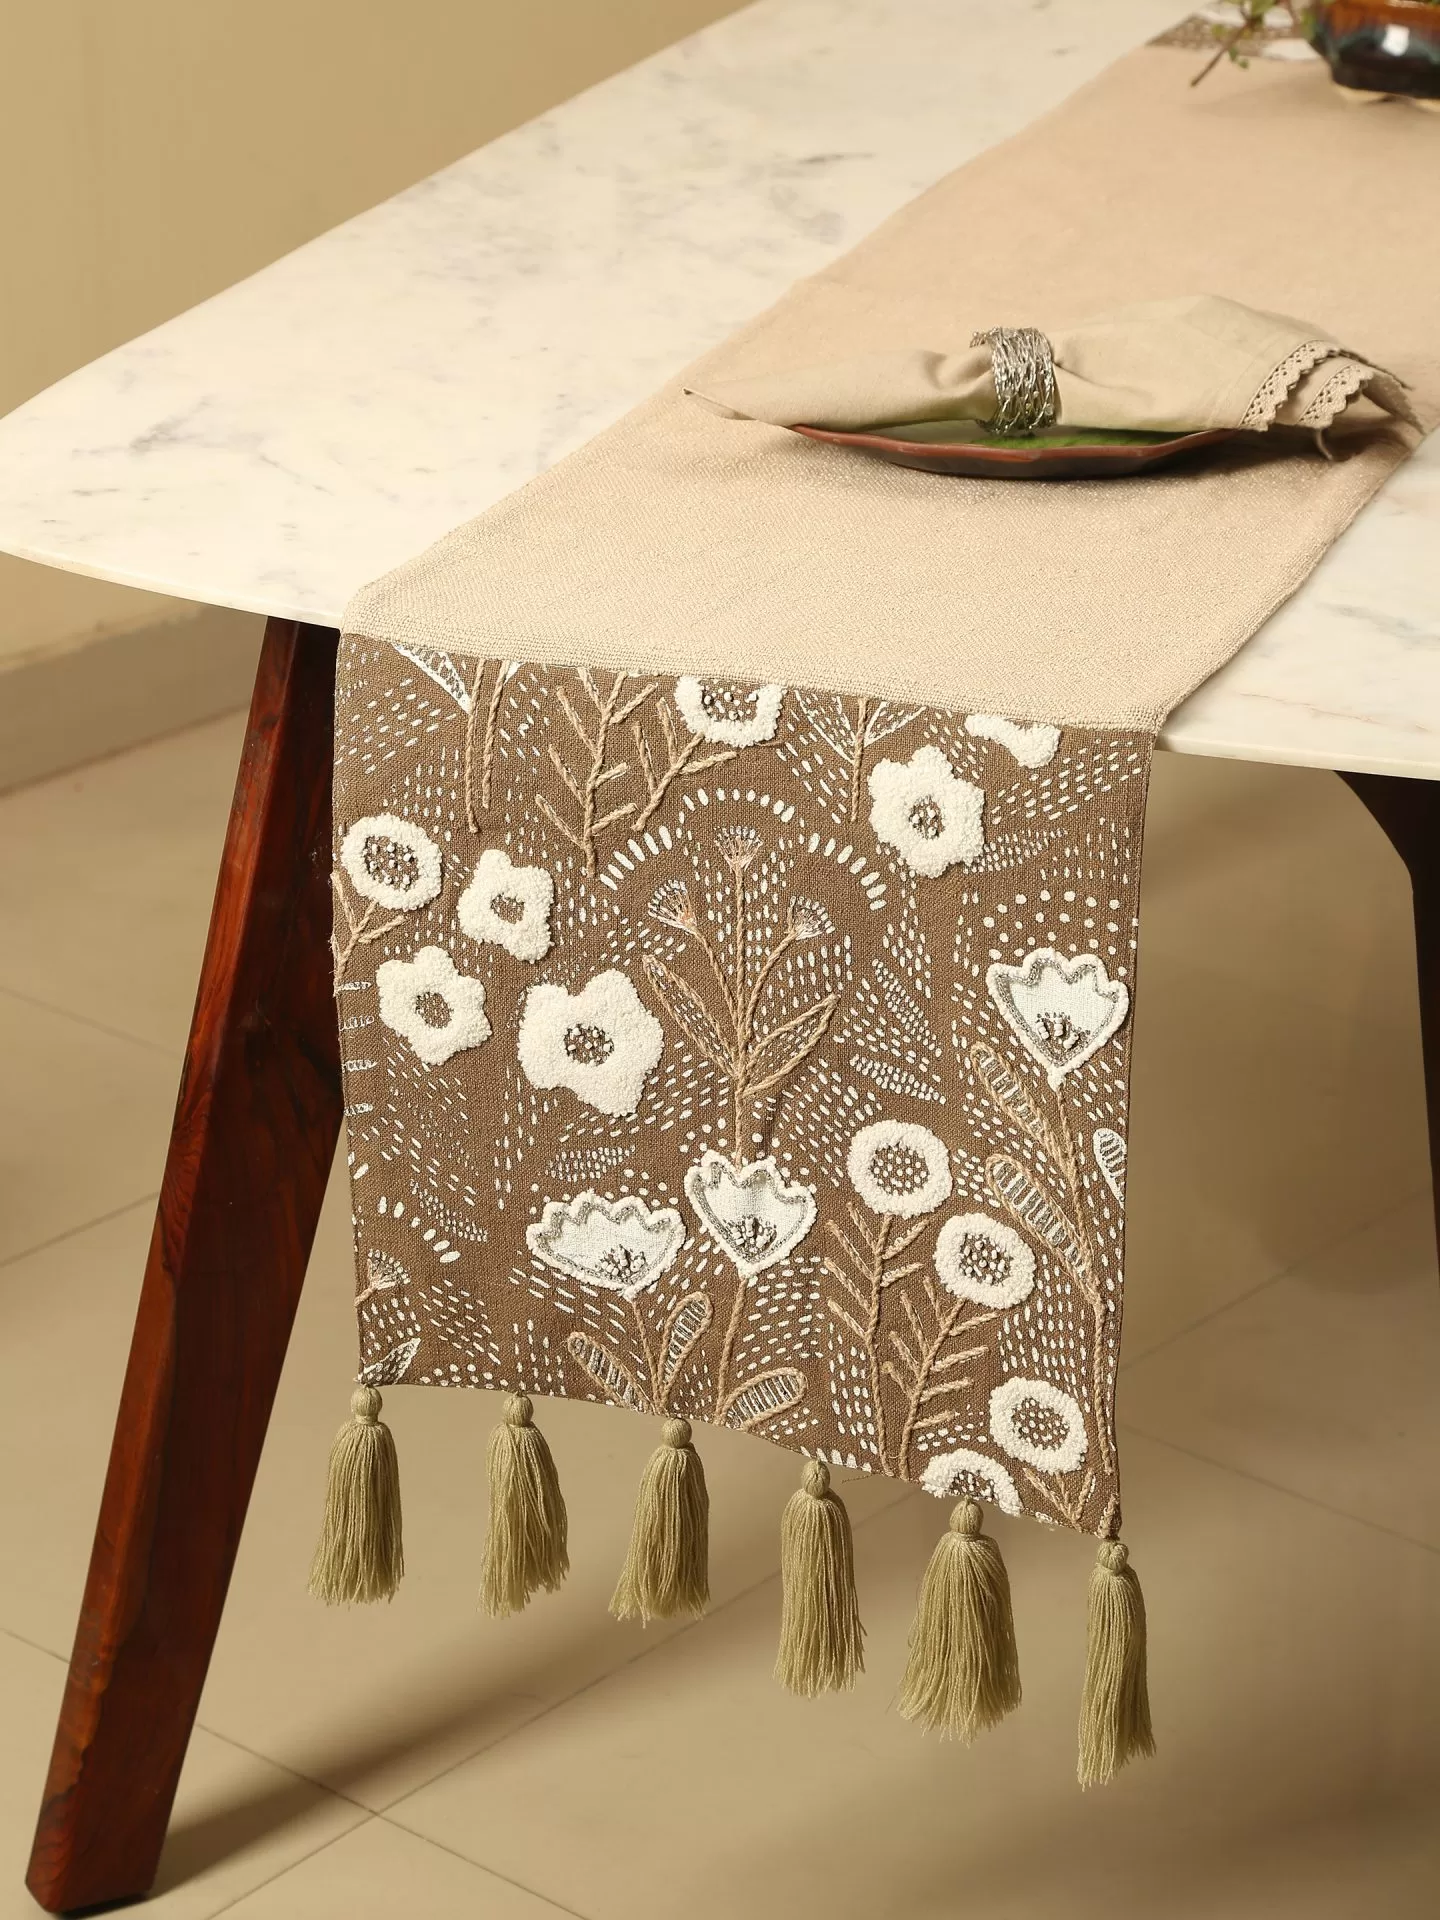 Beige and black hand painted embellished table runner - Amoliconcepts